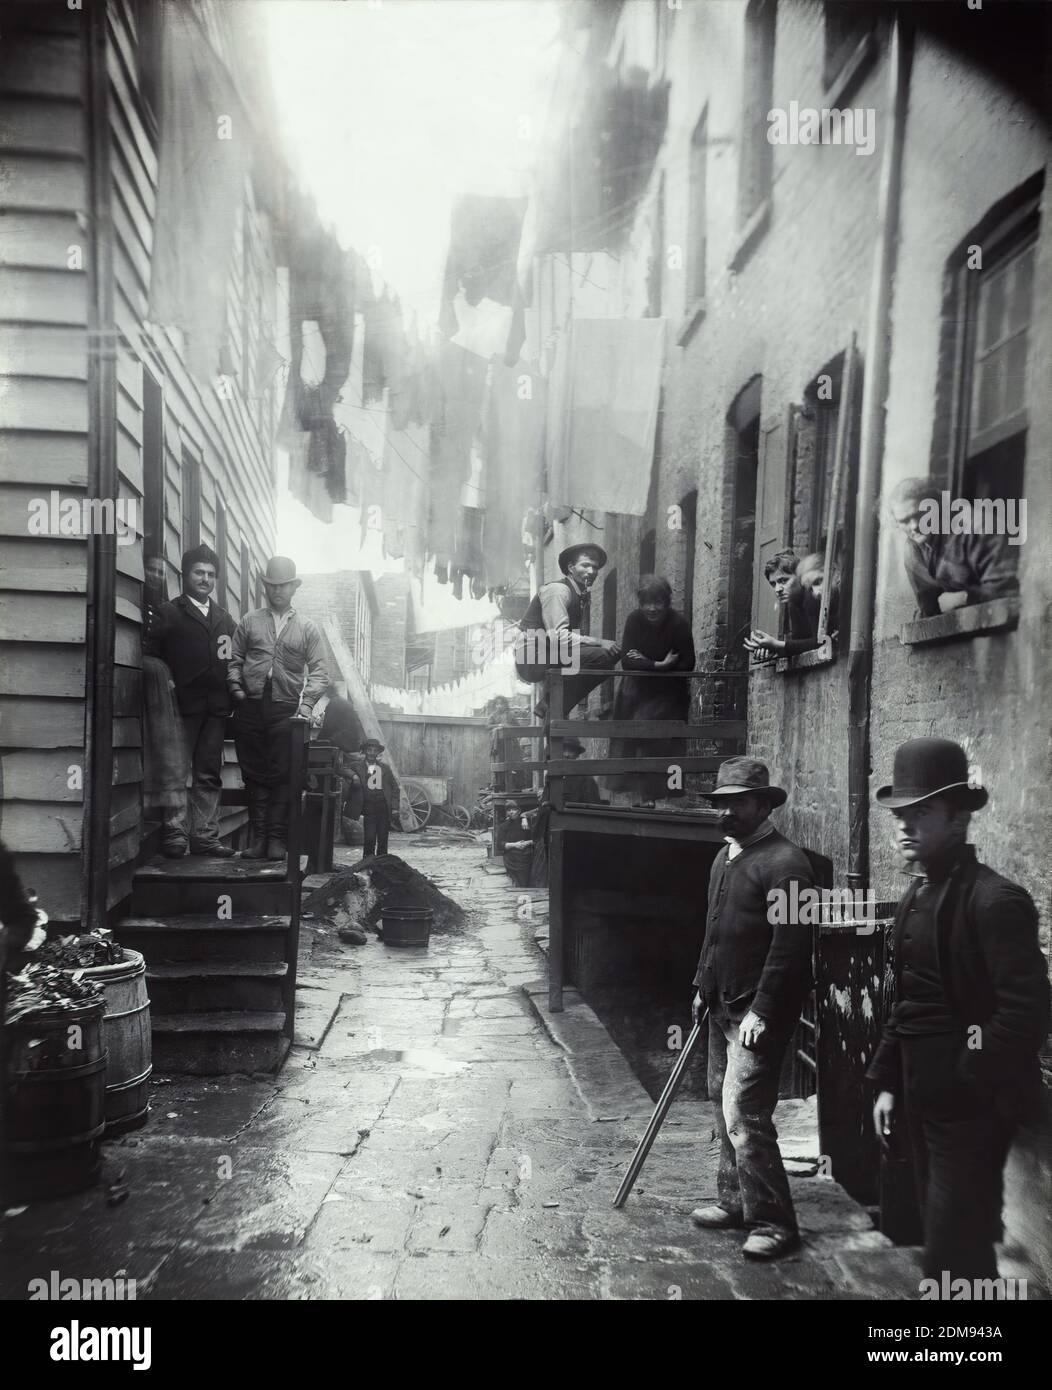 Bandit's Roost 59 1/2 Mulberry Street, New York di Jacob Riis Foto Stock